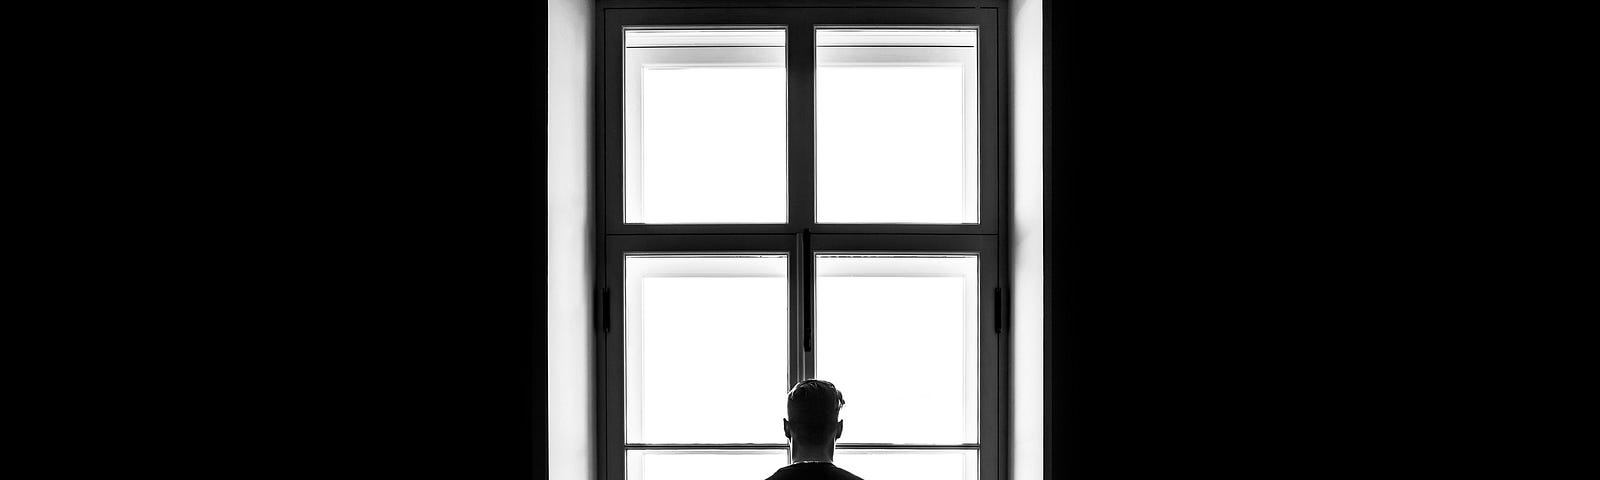 A man looks out the window, in sillouette